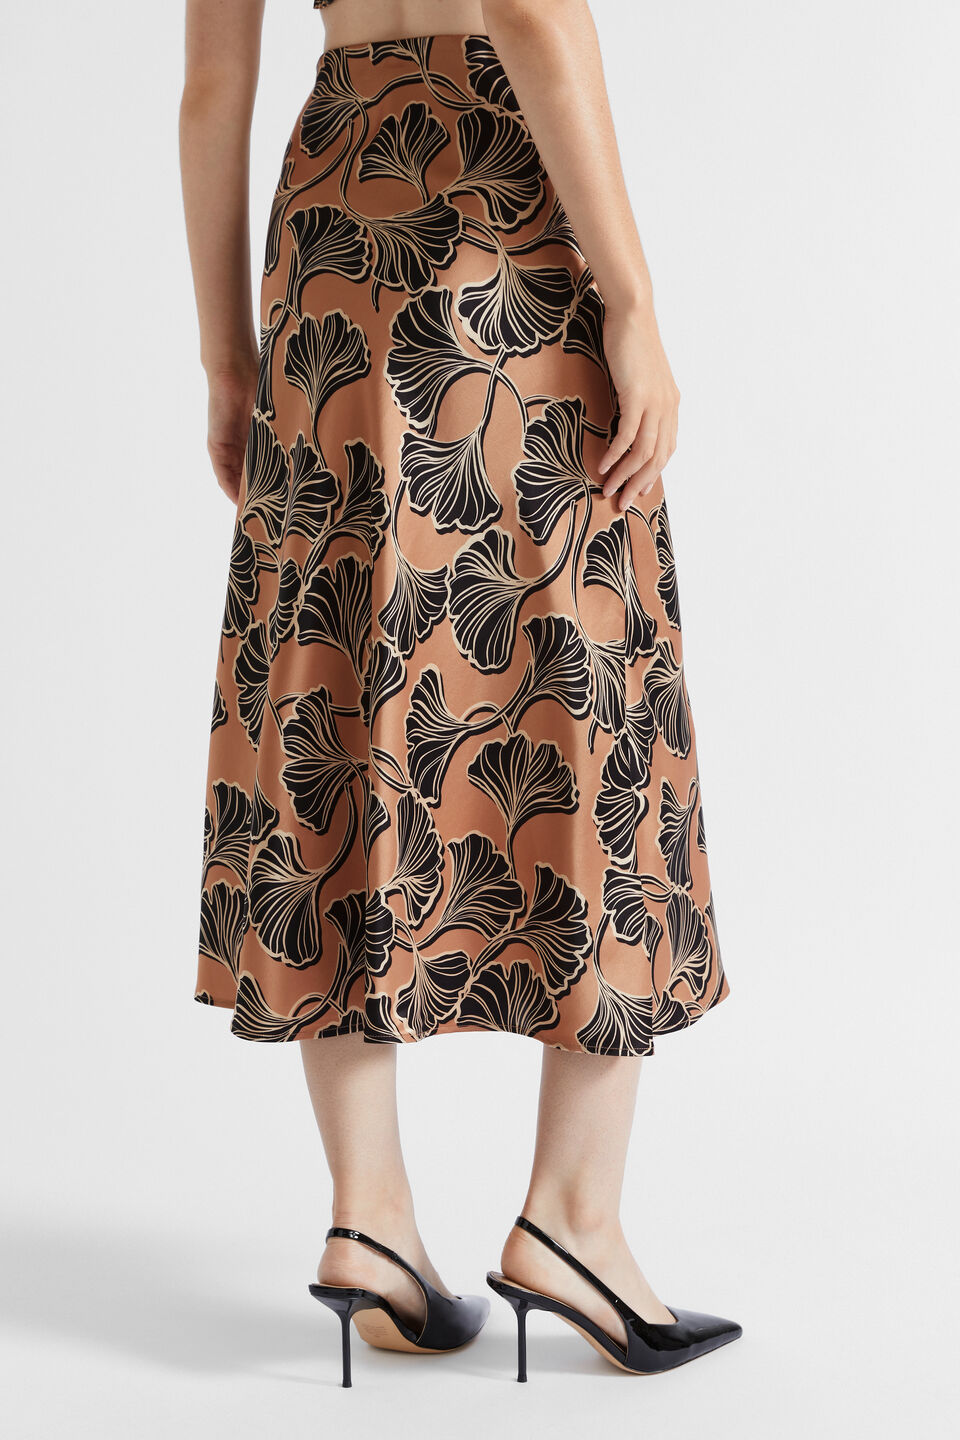 Satin Abstract Floral Skirt  Abstract Floral